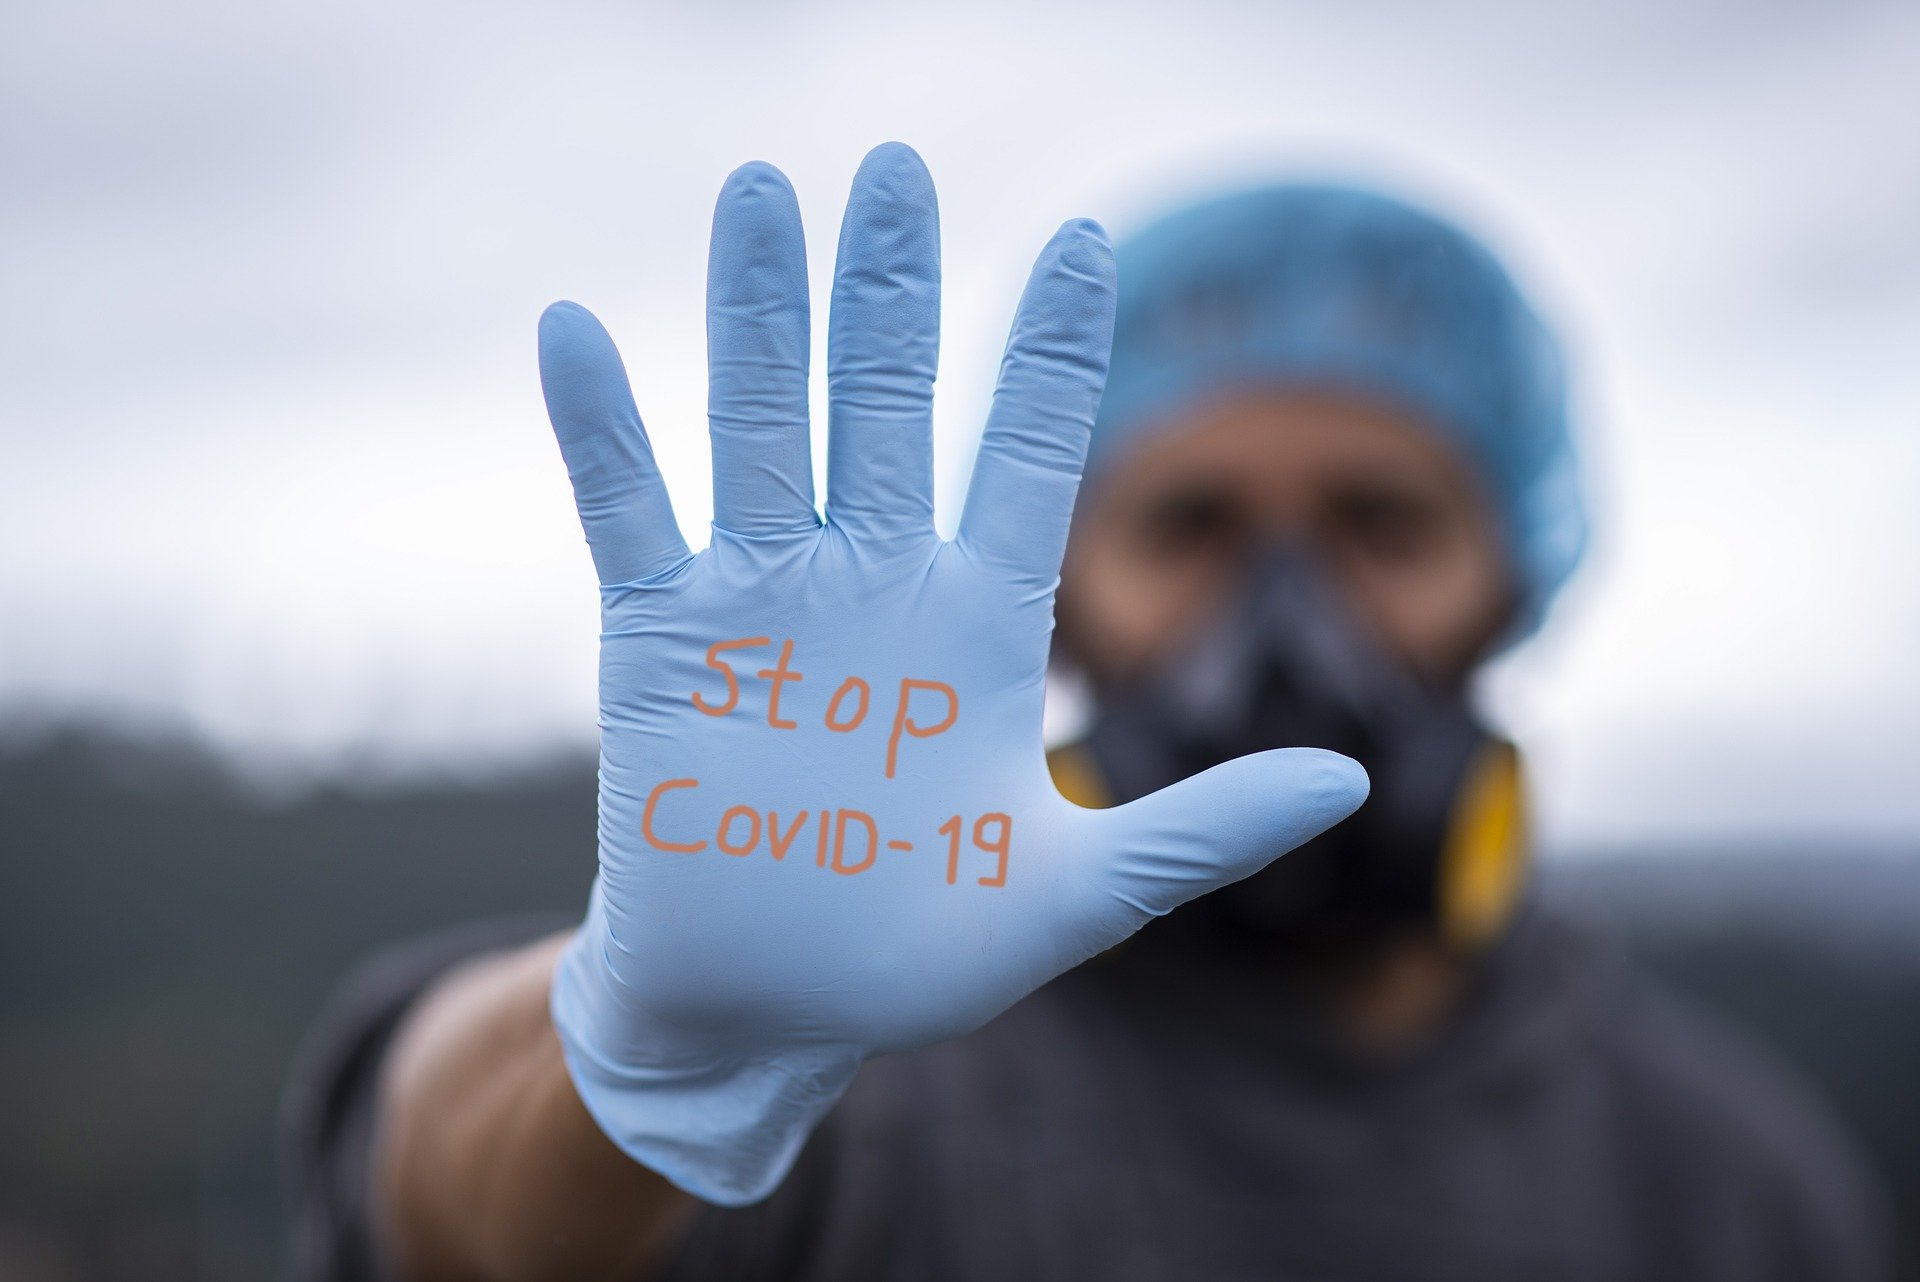 guy with hairnet, mask and glove "Stop Covid-19"